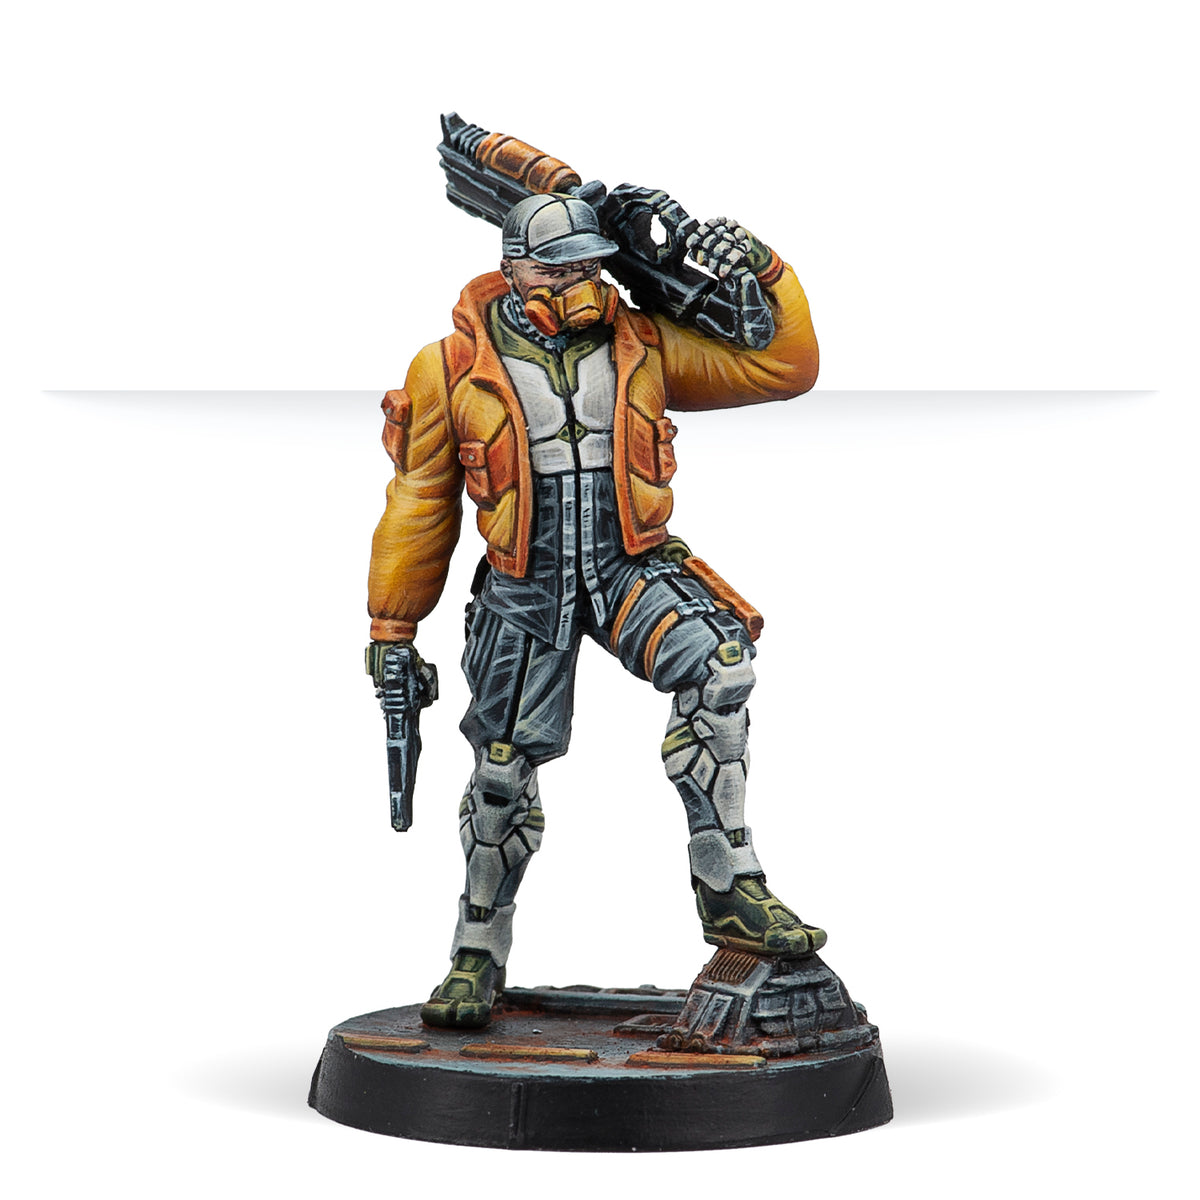 Bounty Hunter Event Exclusive Edition [LIMITED EDITION]